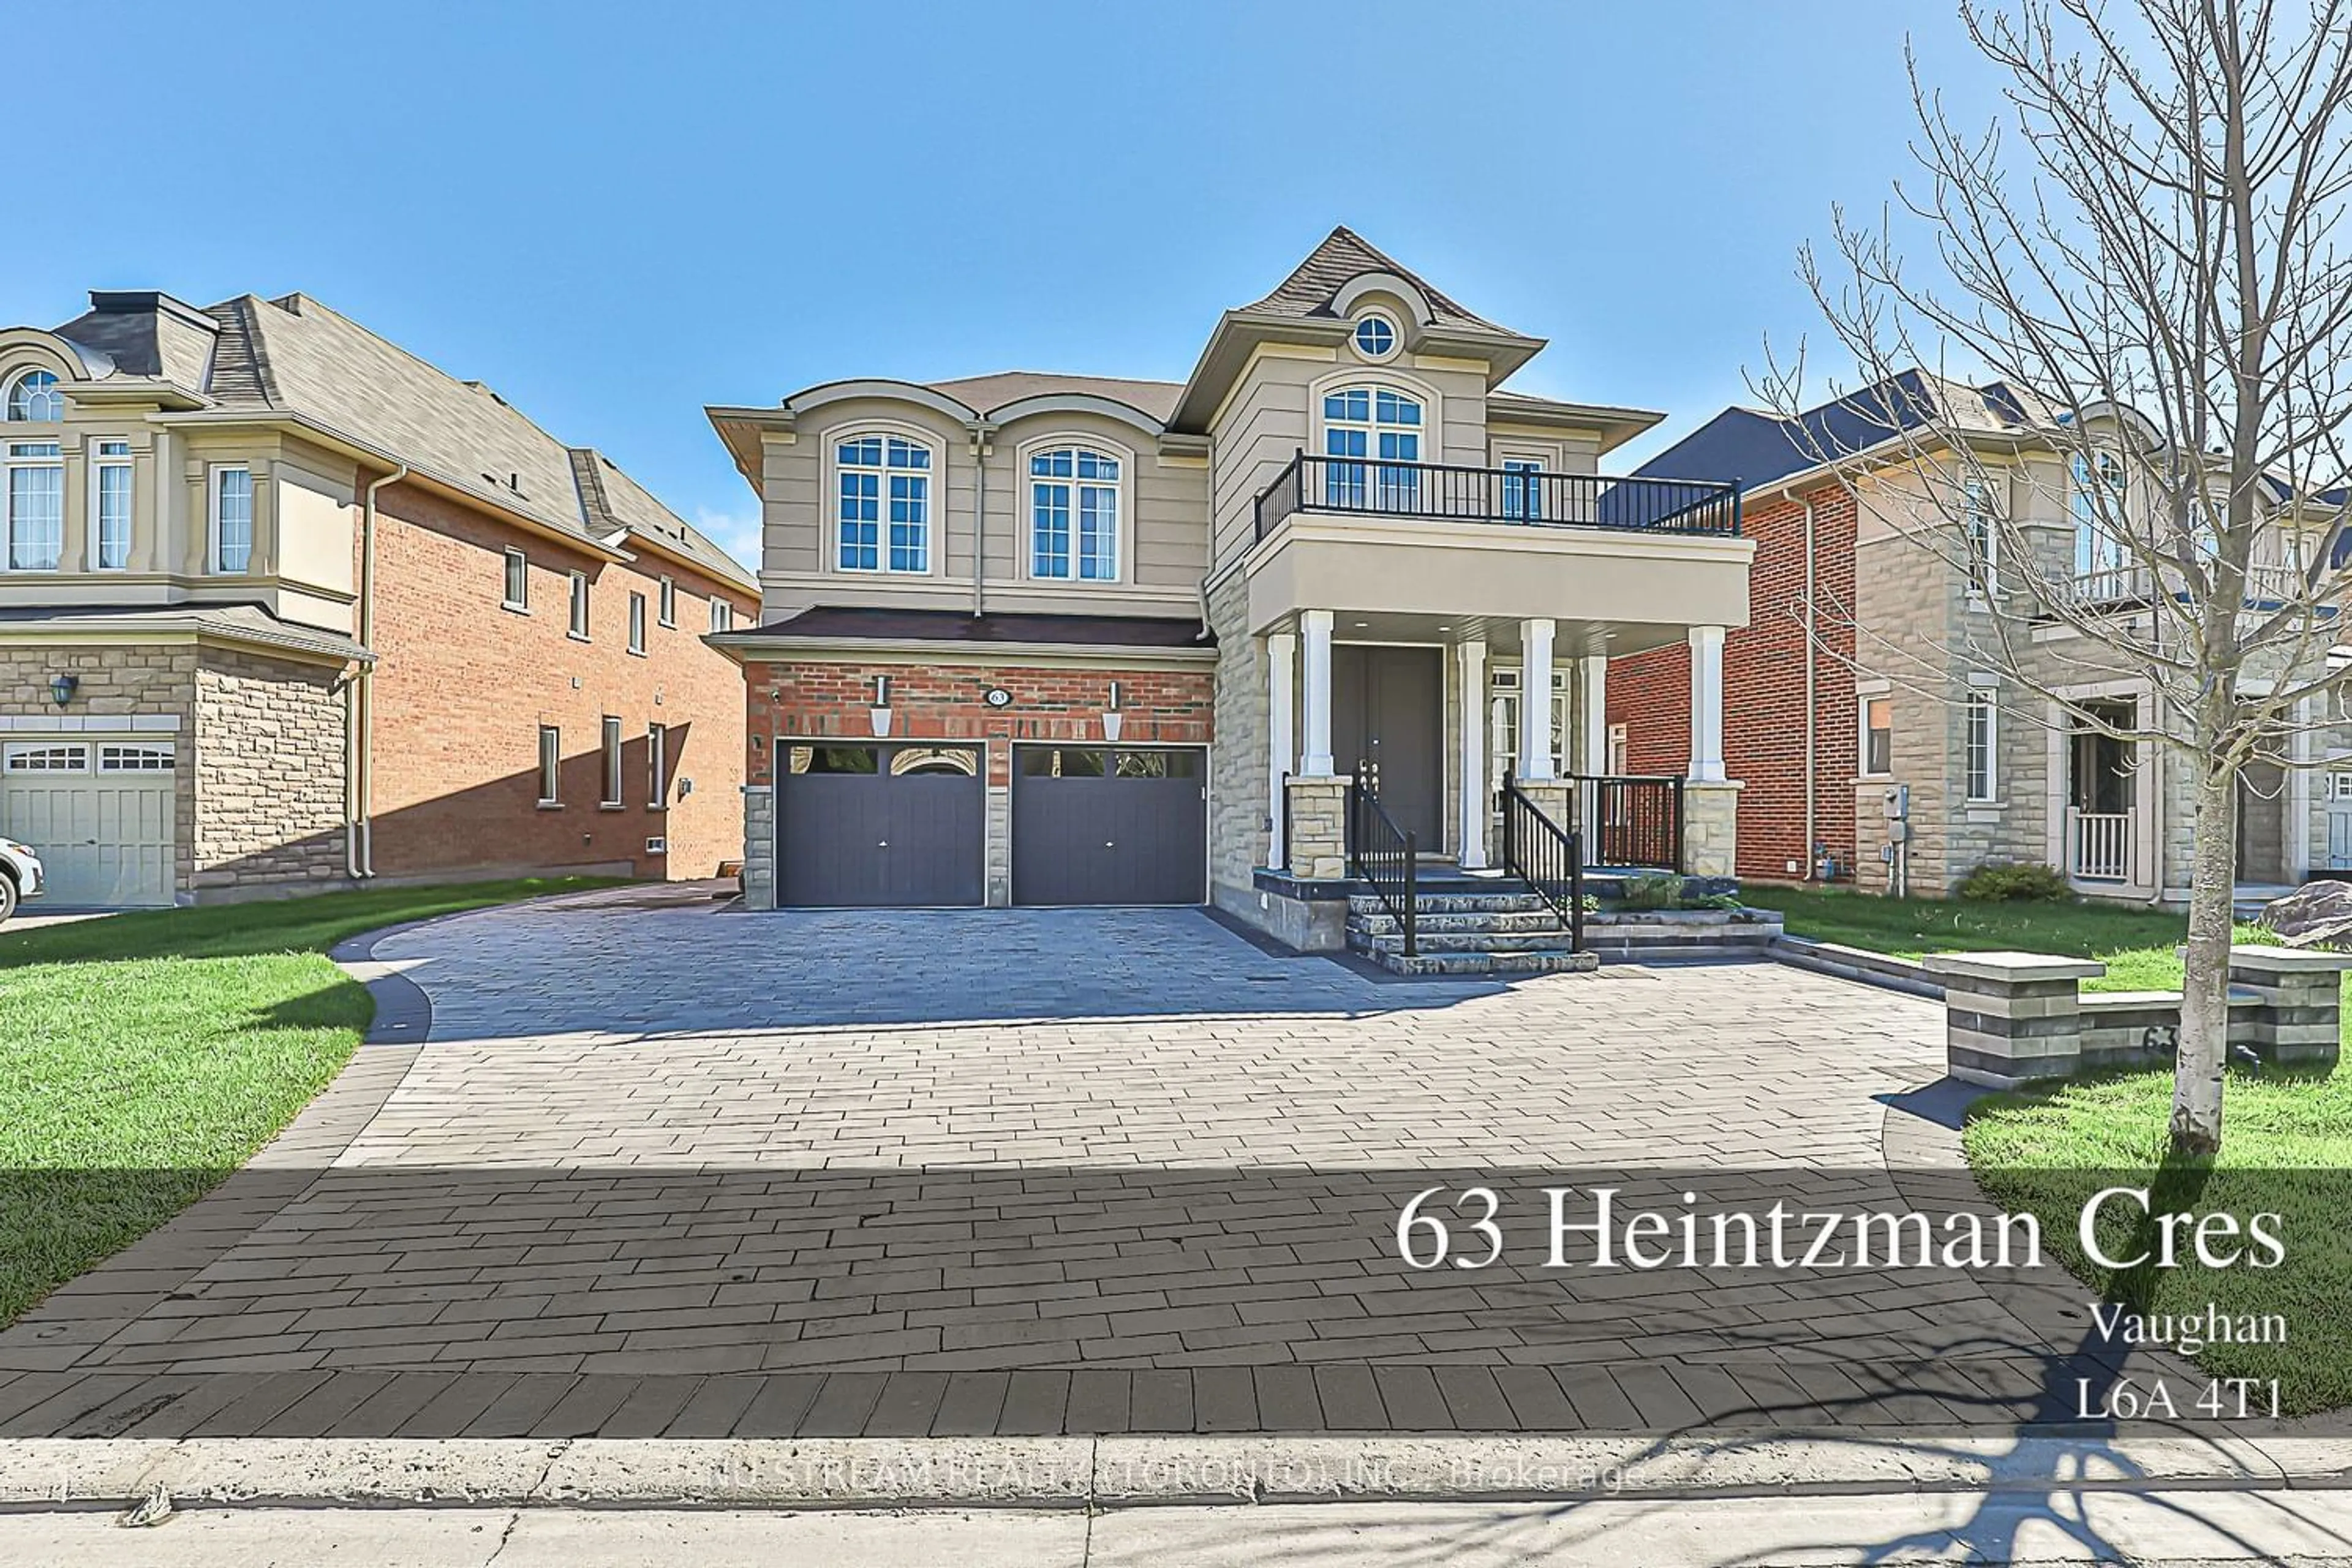 Home with brick exterior material for 63 Heintzman Cres, Vaughan Ontario L6A 4T1